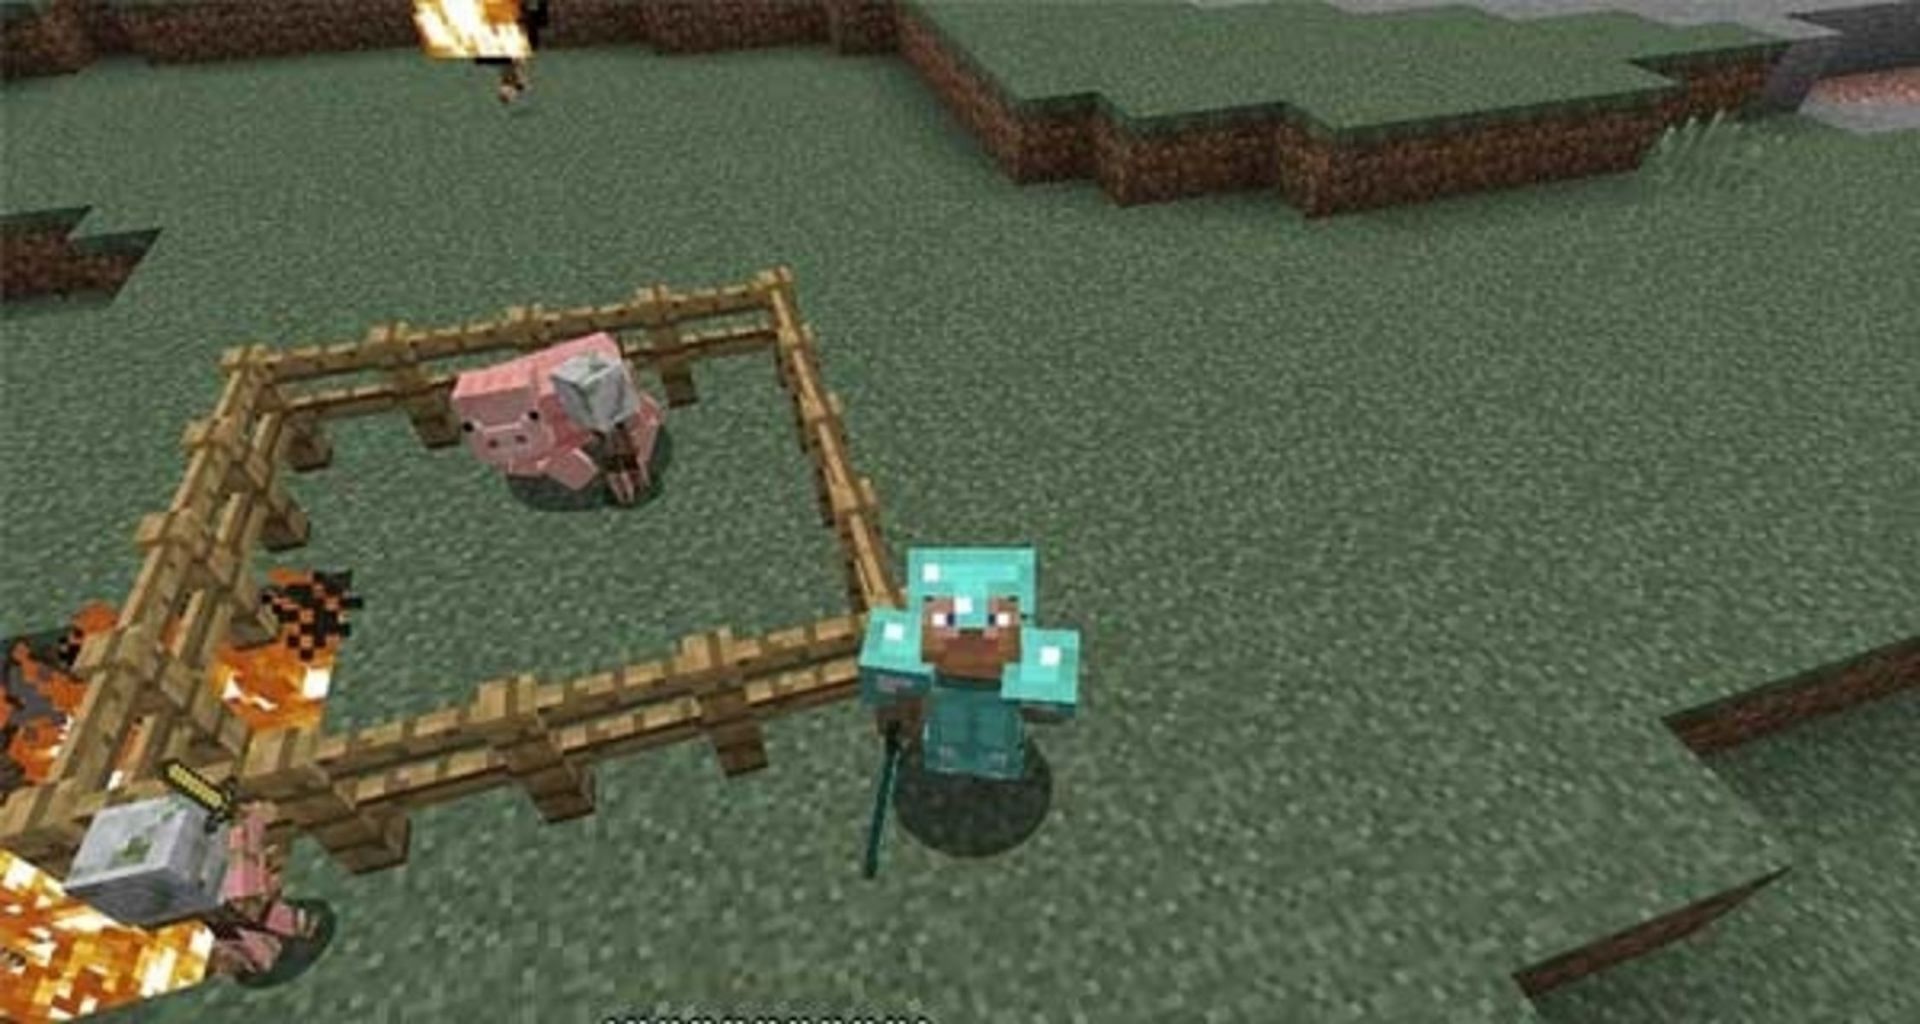 Save the Pig! is an enjoyable combat minigame where players must focus on defense (Image via Mojang/Tynker)